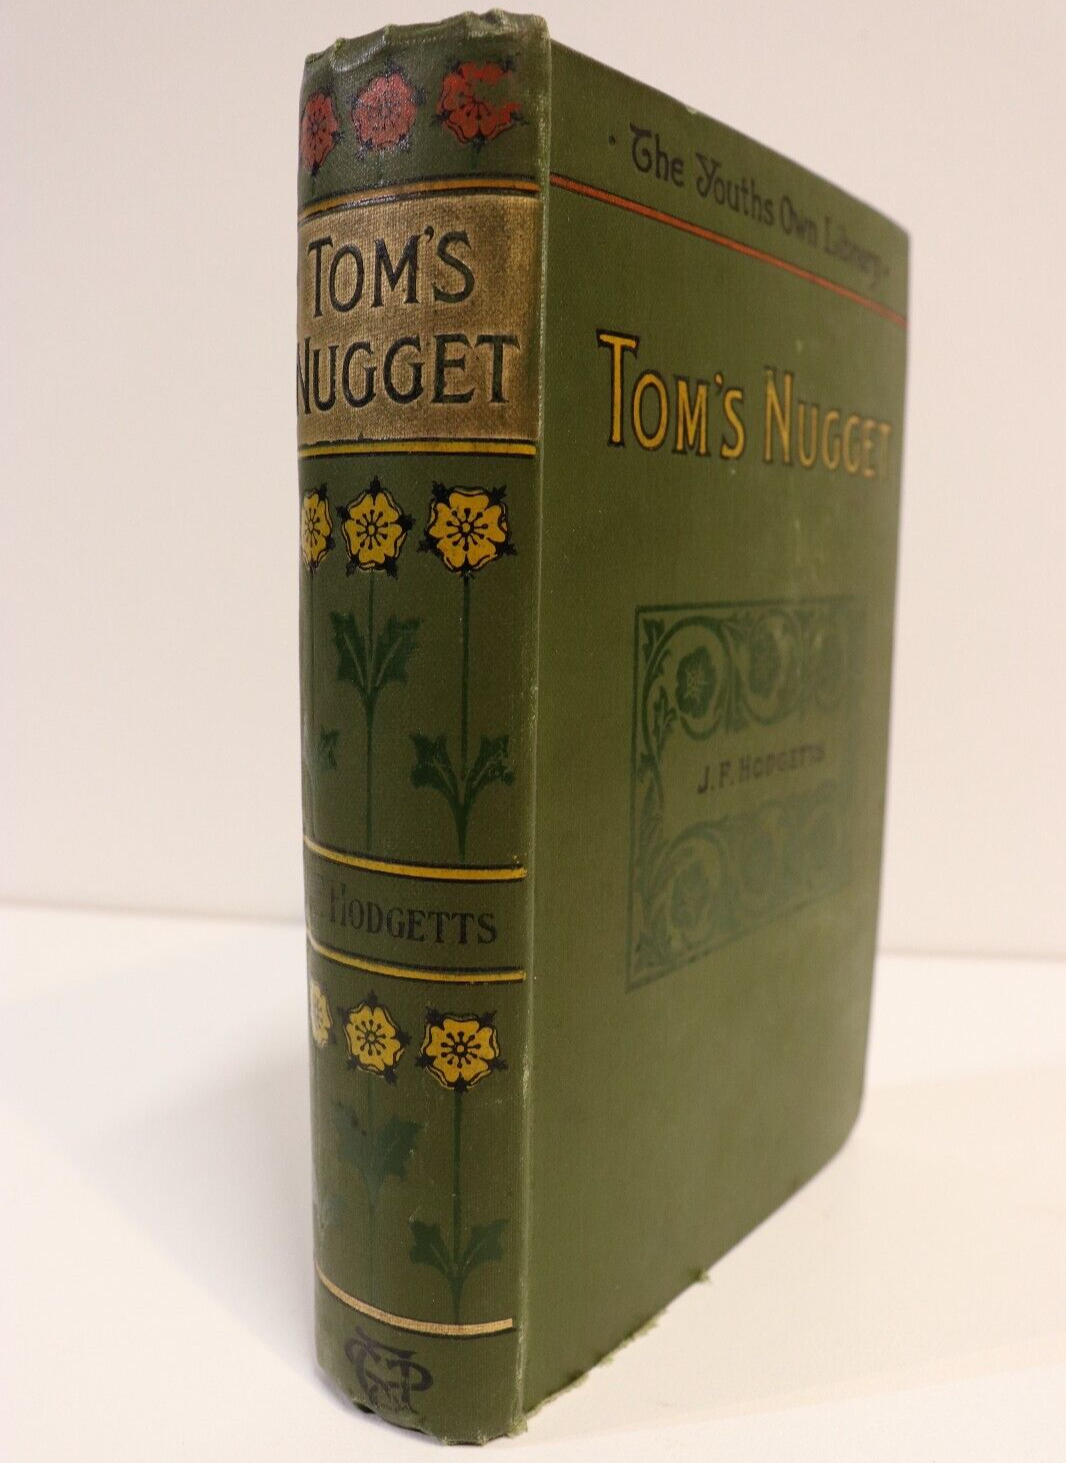 c1900 Tom's Nugget: A Story Of The Goldfields Antique Australian Fiction Book